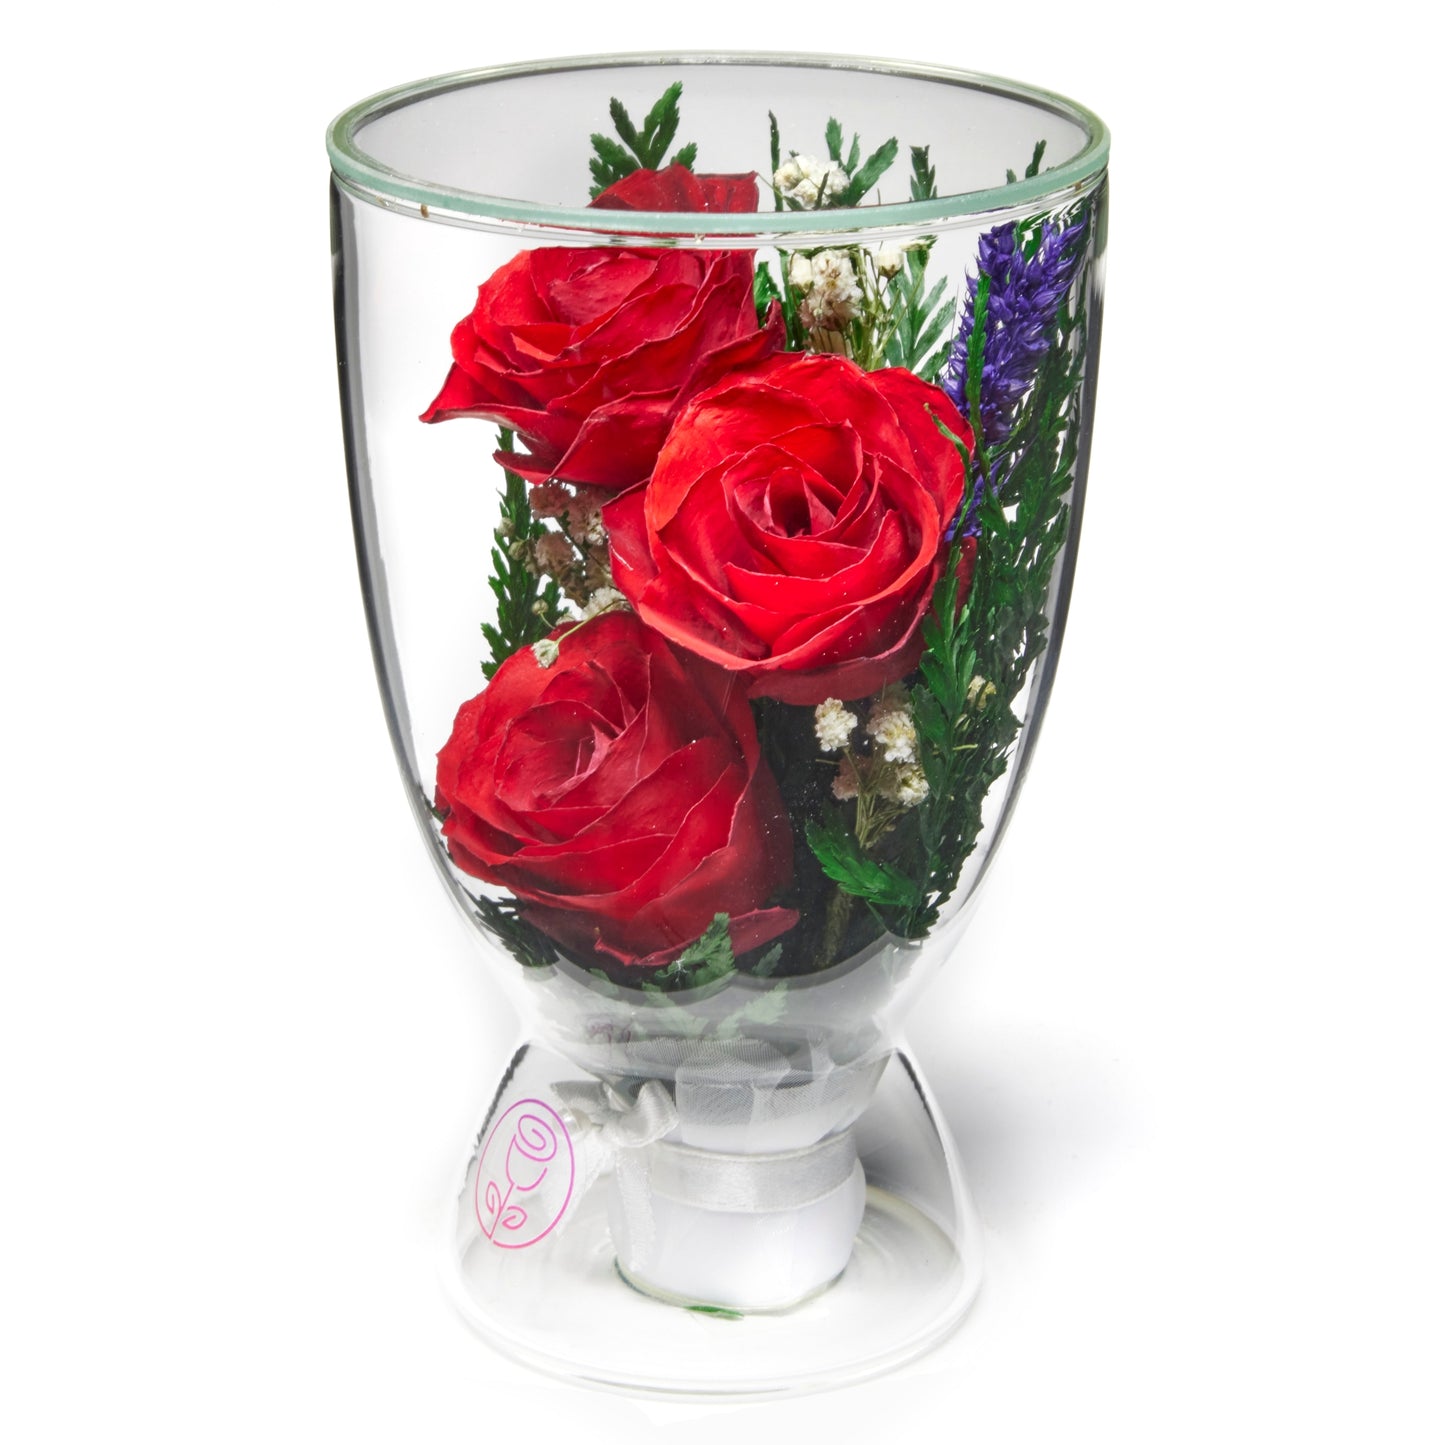 In Flores Veritas: Trio of Eternal Red Roses in Cup-like Vase - Lasts up to 5 Years - Elegant Gift for Any Occasion